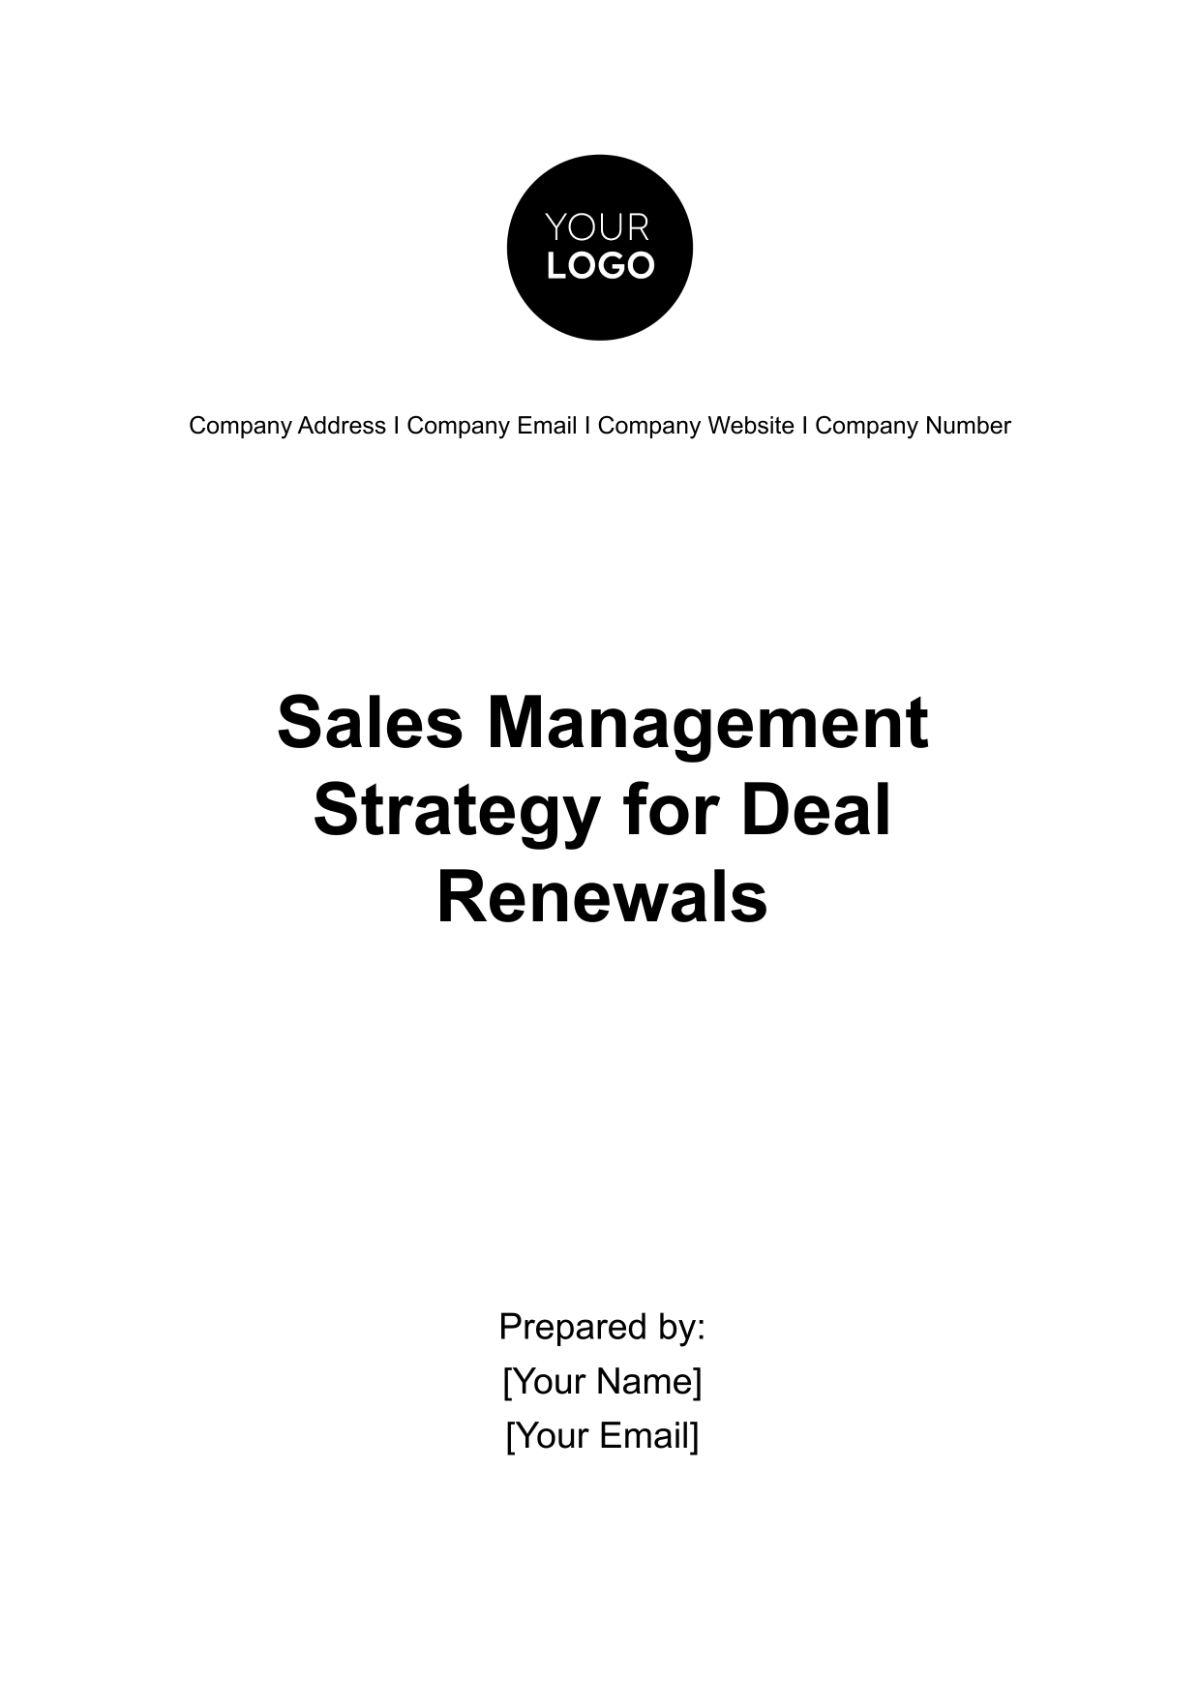 Sales Management Strategy for Deal Renewals Template